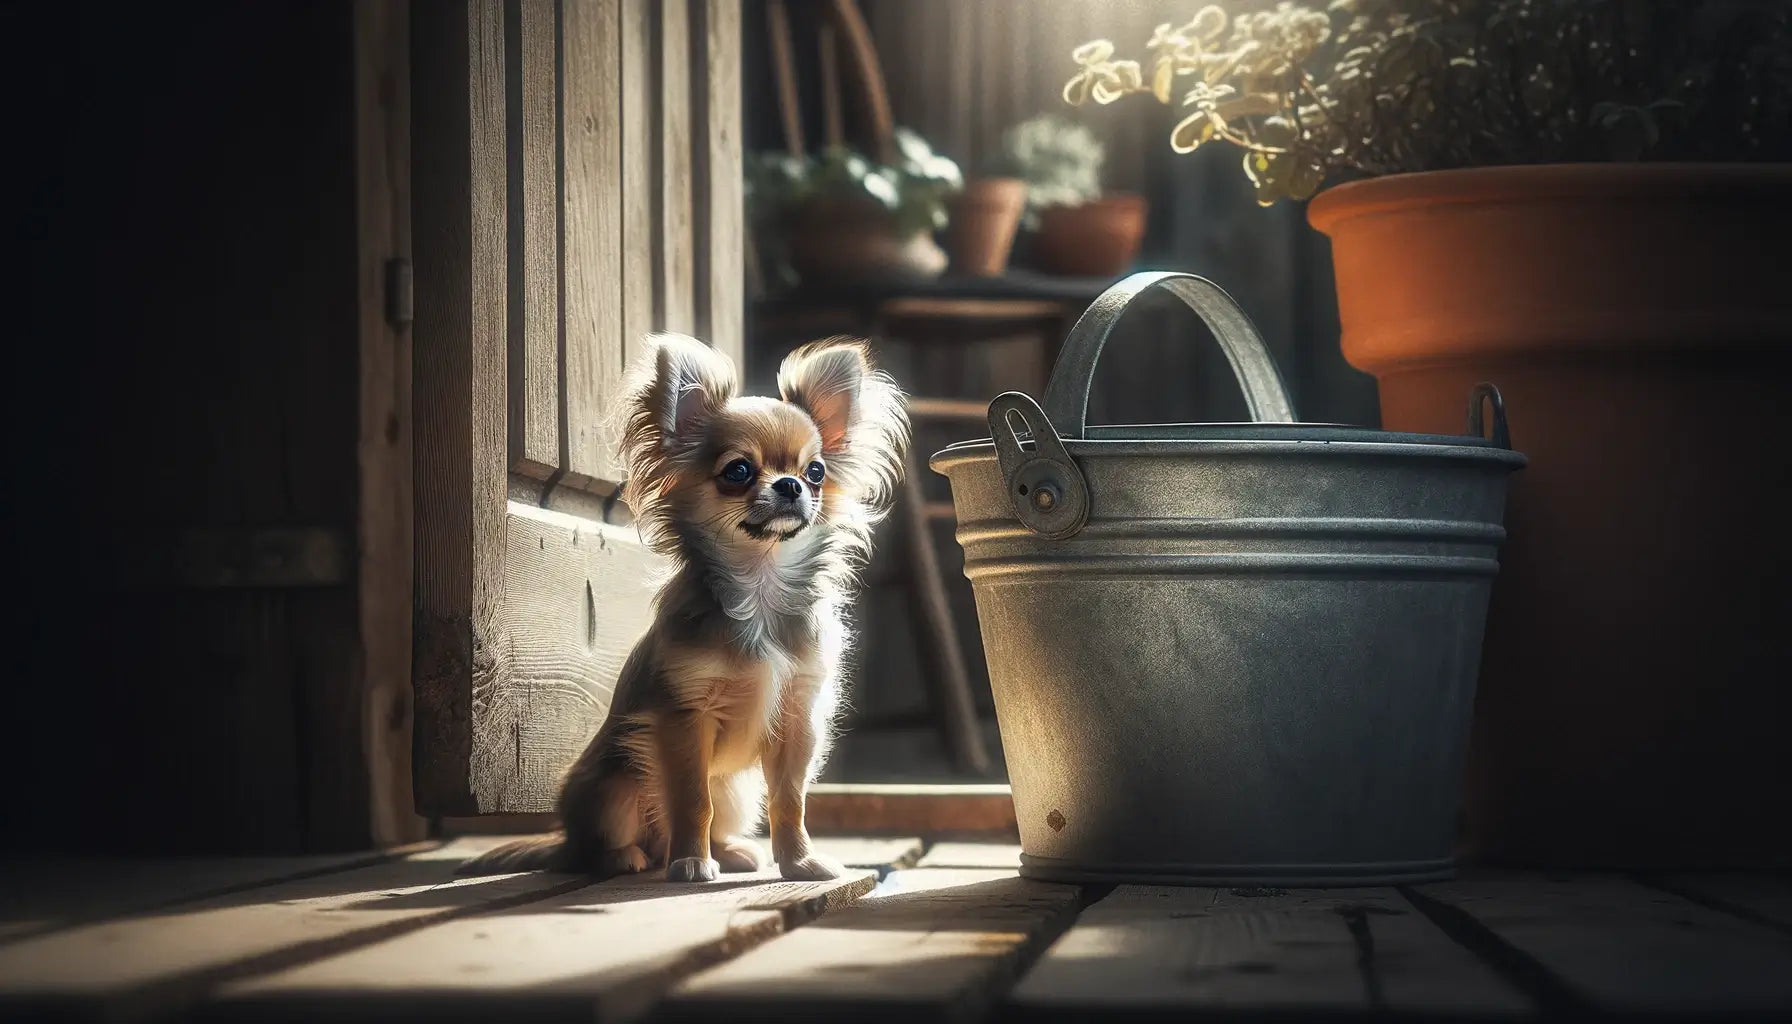 Long-Haired Chihuahua puppy stands confidently by a door, its compact size highlighted next to a large pot.